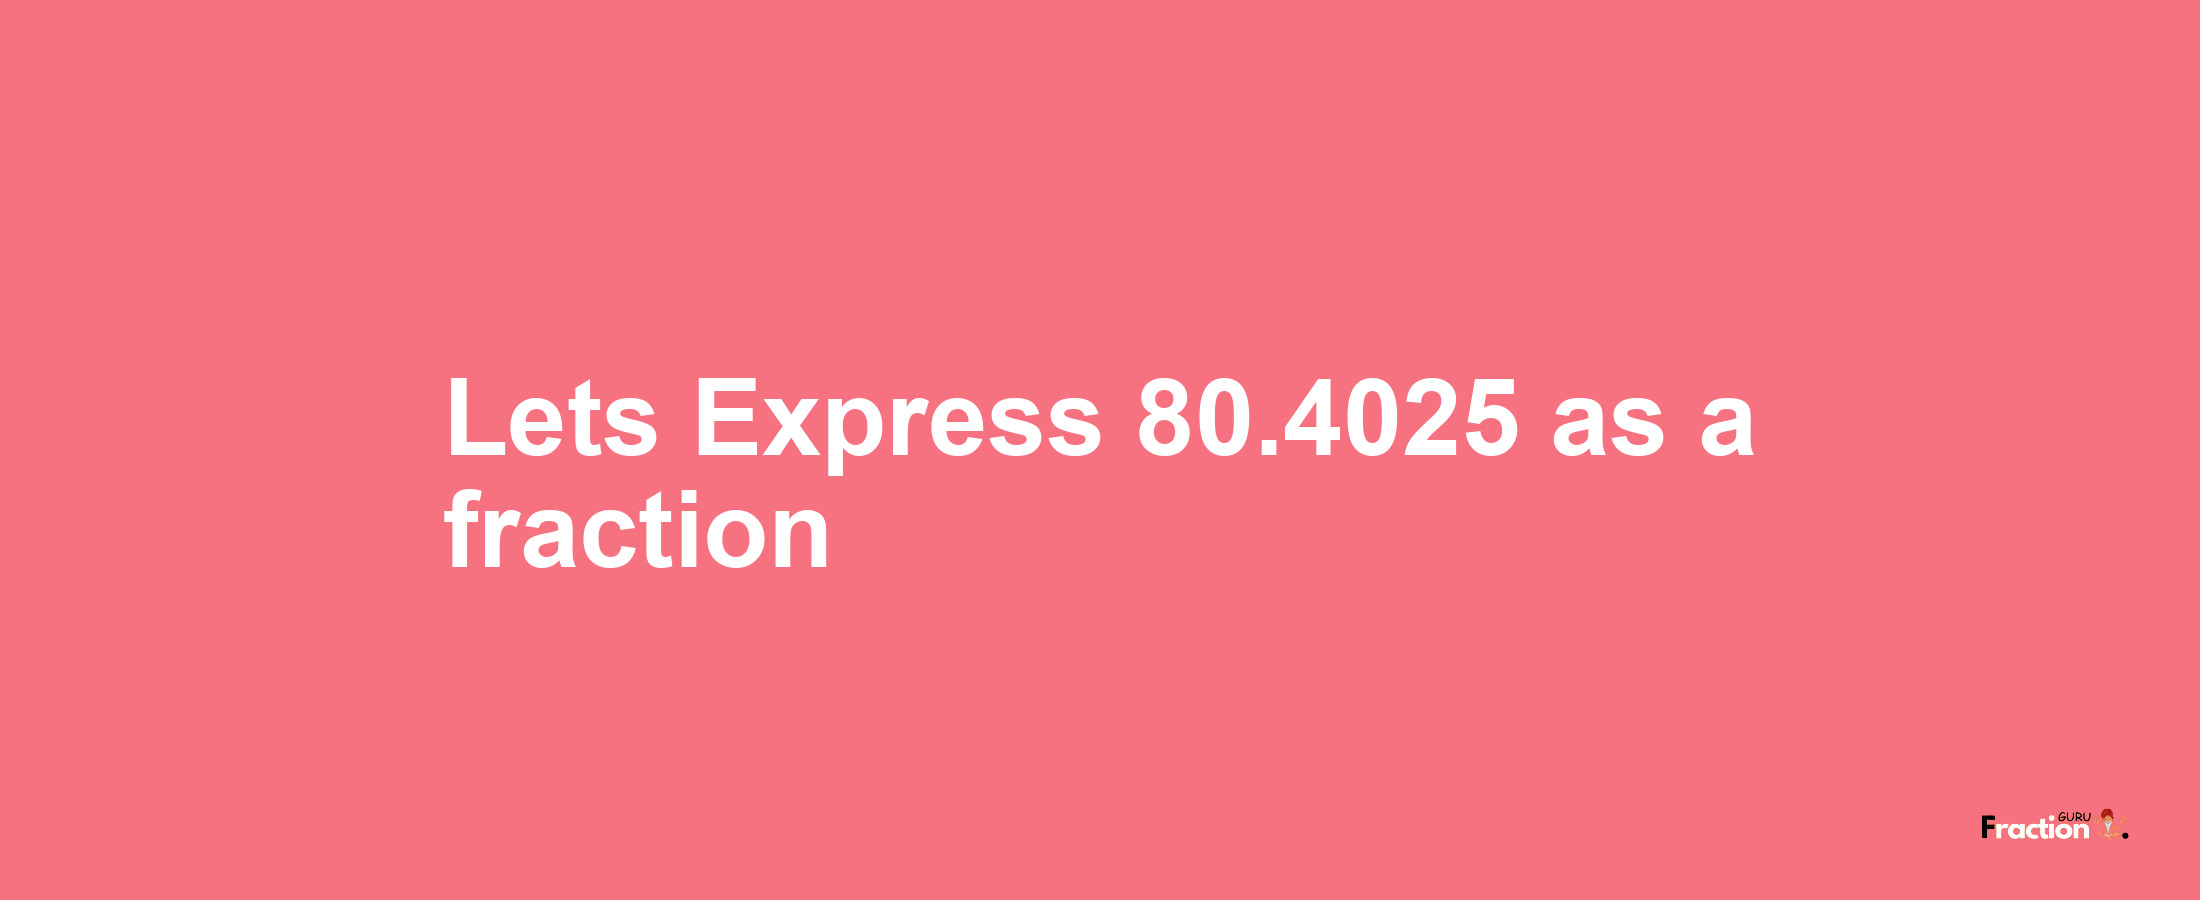 Lets Express 80.4025 as afraction